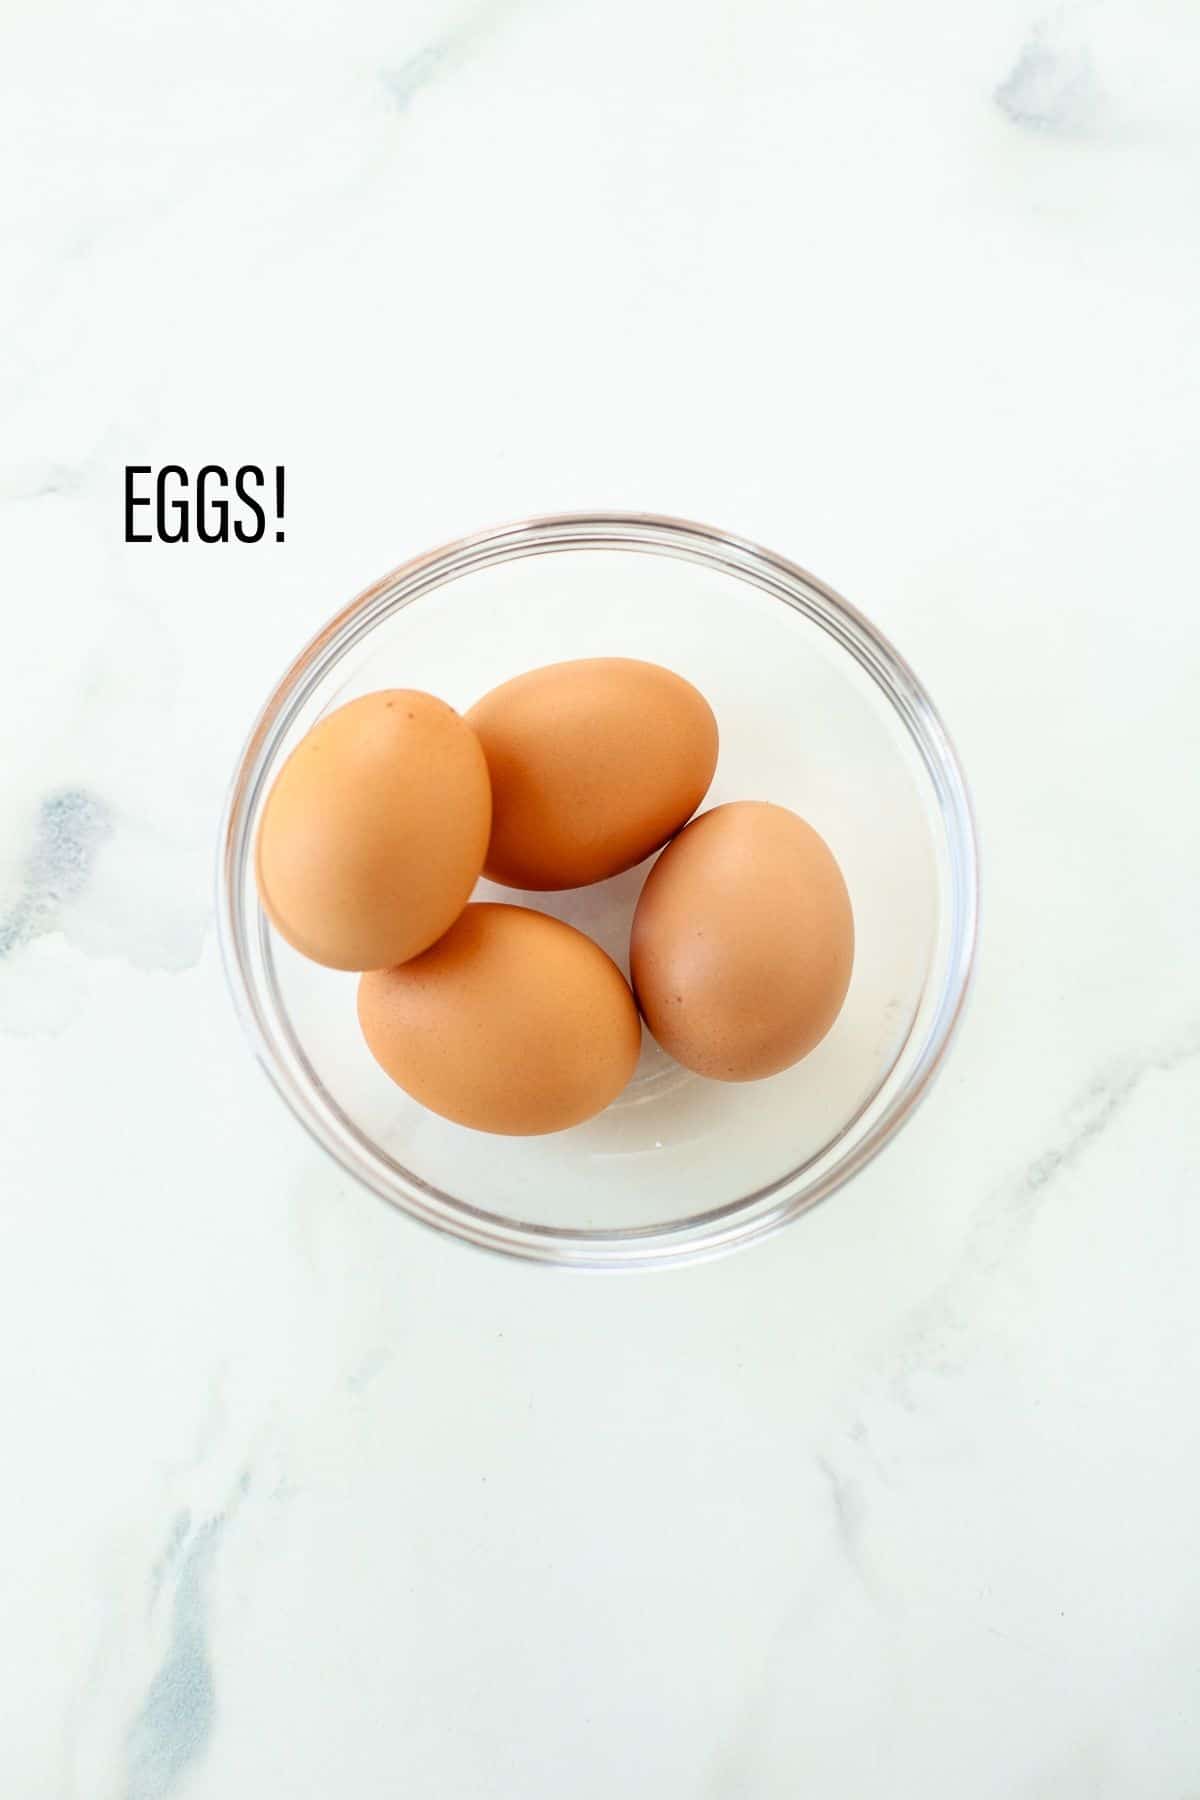 ingredients: eggs in clear bowl, white background